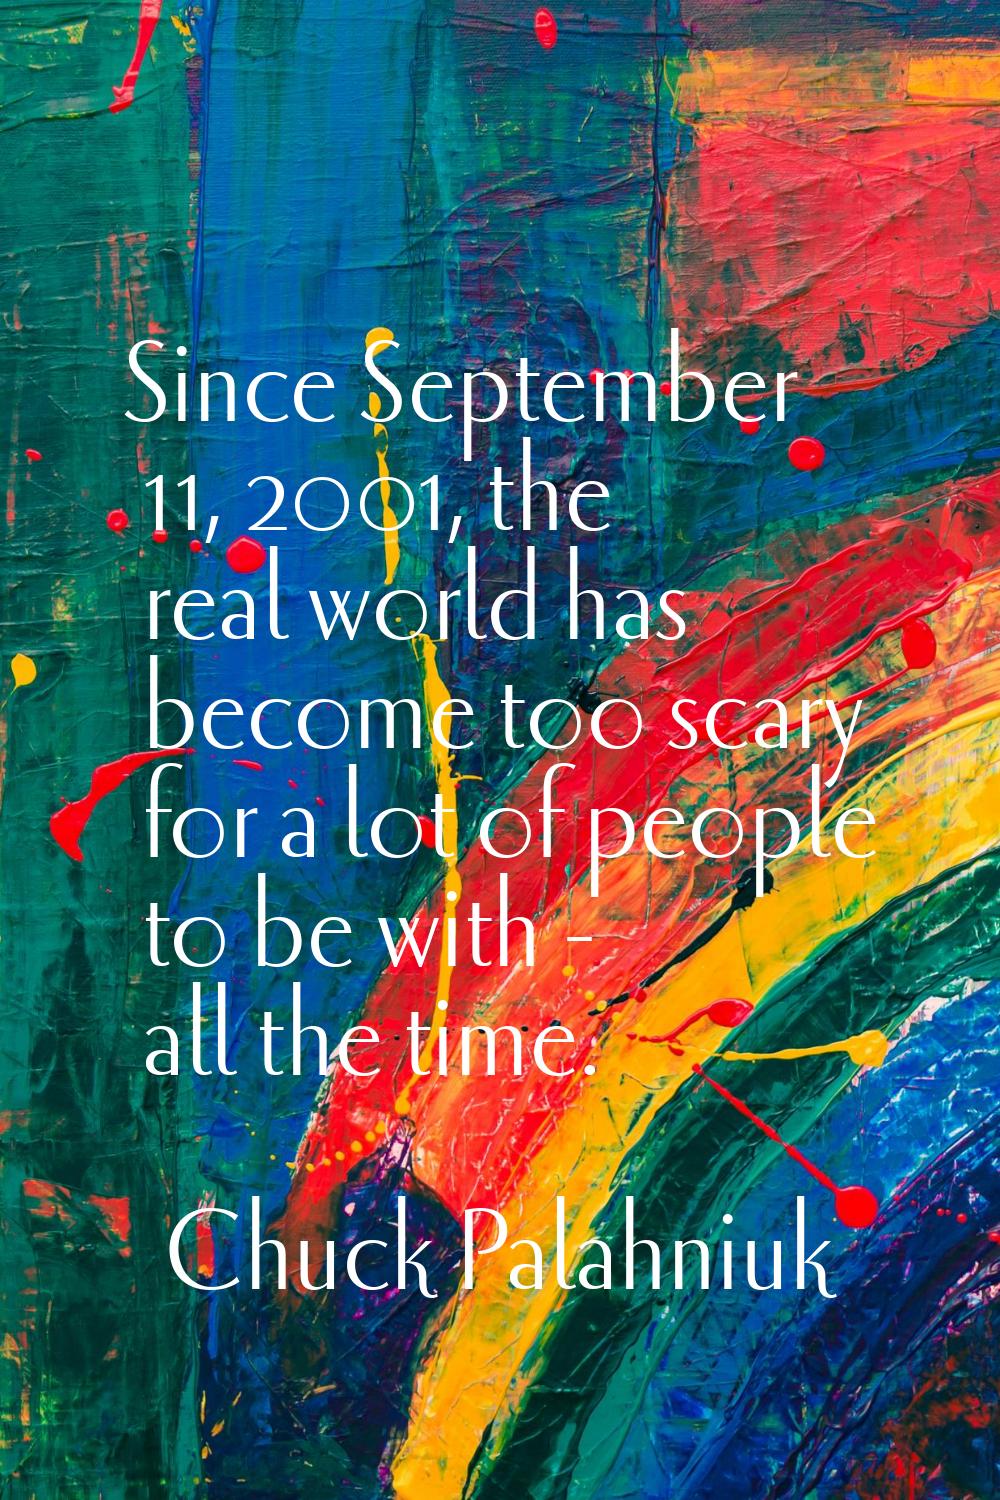 Since September 11, 2001, the real world has become too scary for a lot of people to be with - all 